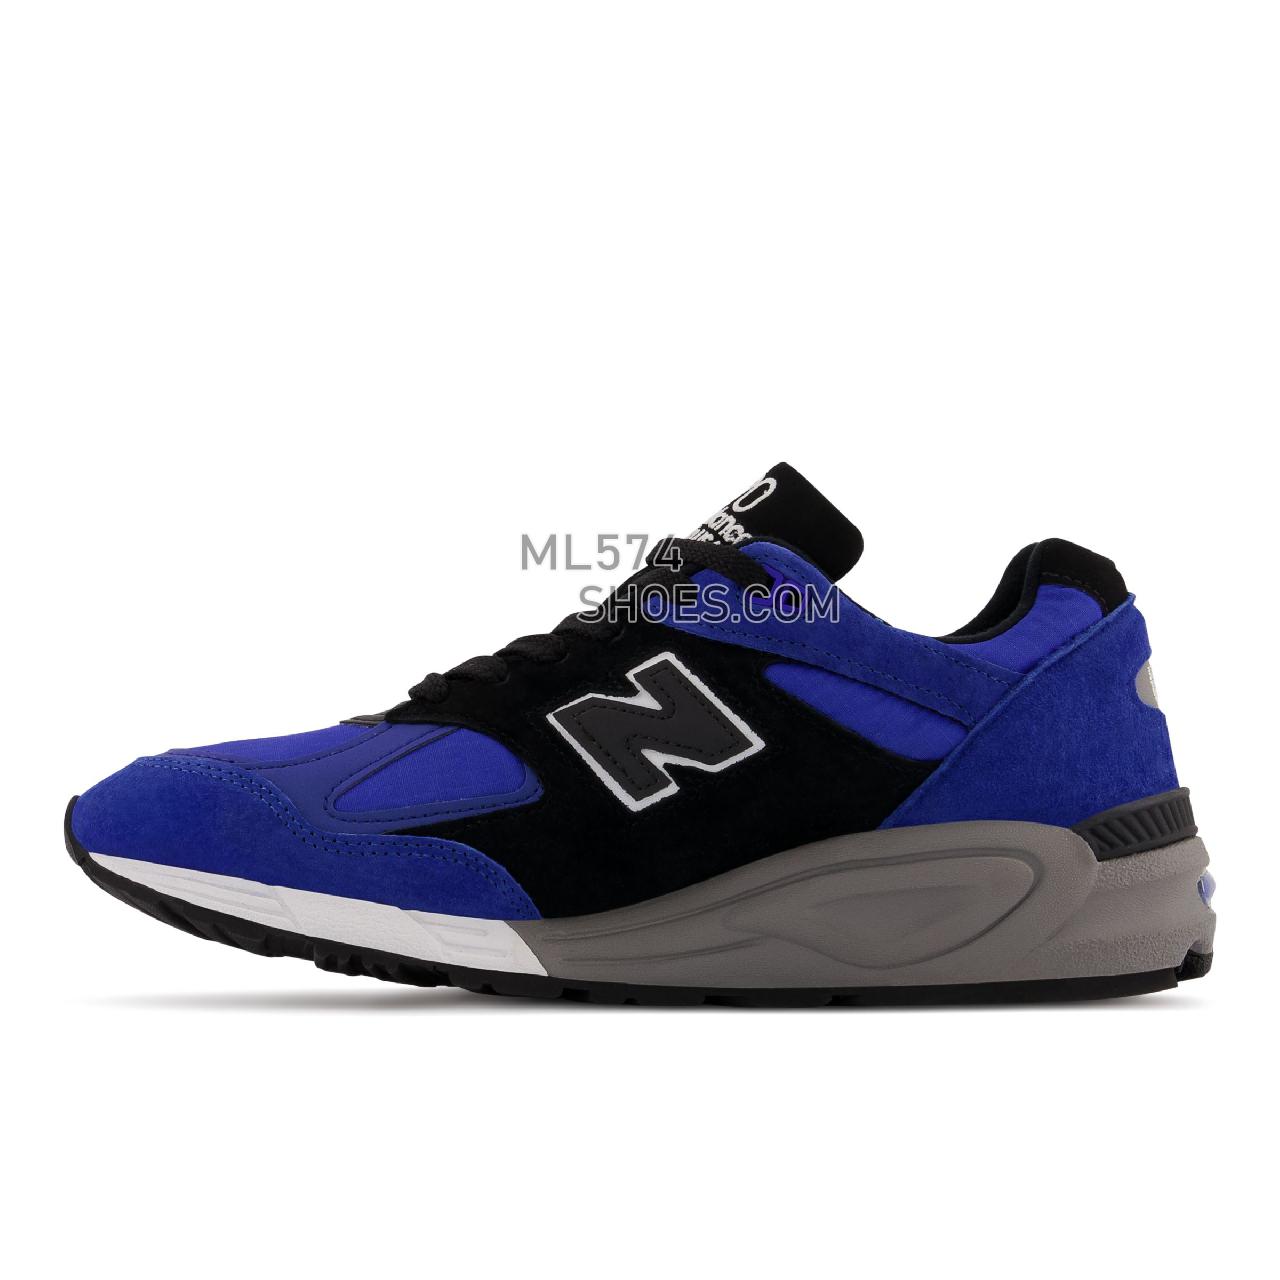 New Balance Made in USA 990v2 - Men's Made in USA And UK Sneakers - Blue with Black - M990PL2